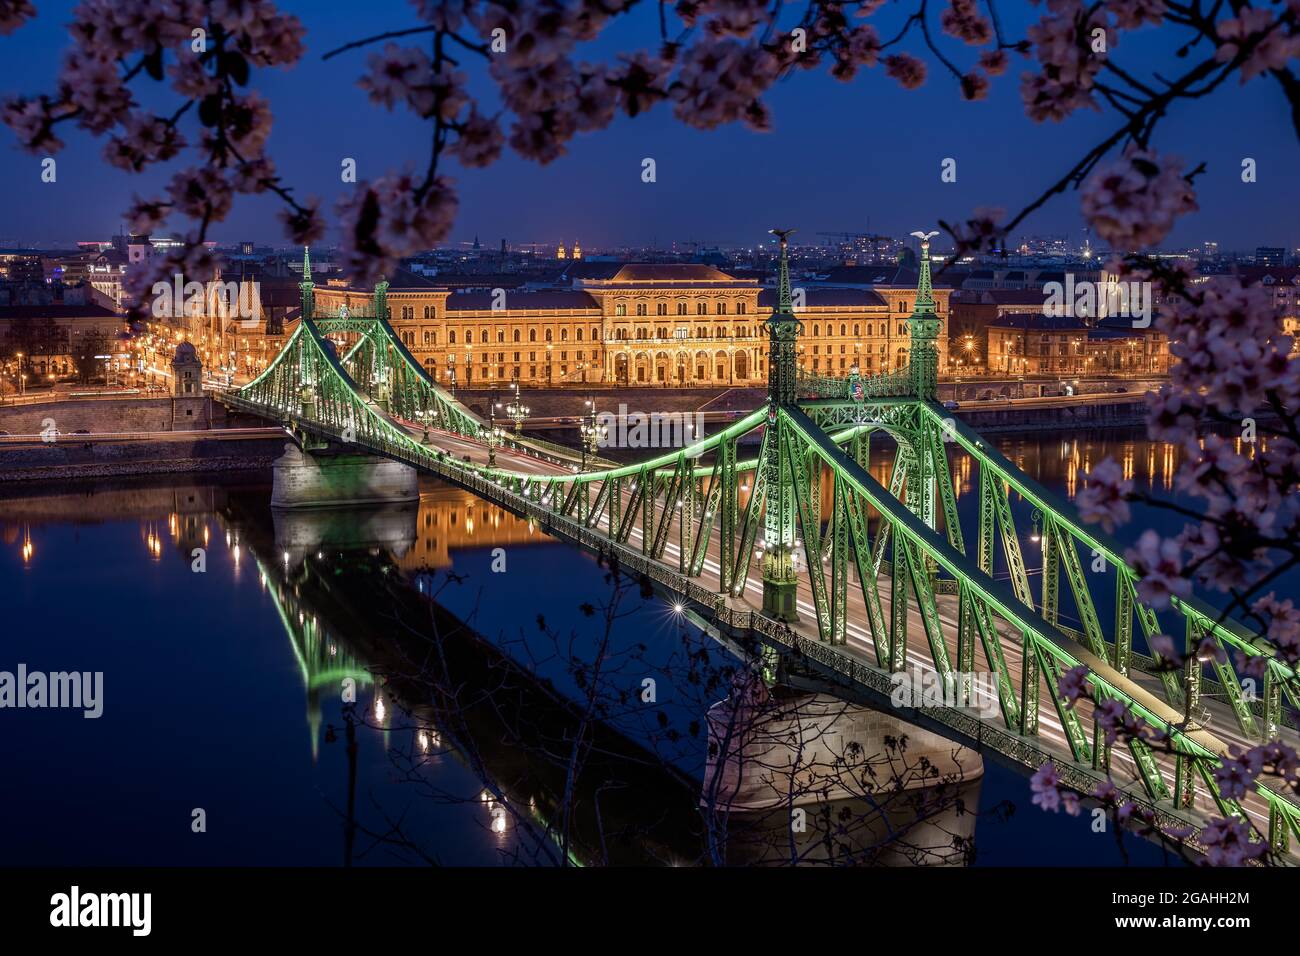 Budapest, Hungary - Illuminated Liberty Bridge over River Danube at dusk with cherry blossom tree at foreground taken from Gellert Hill. Spring has ar Stock Photo